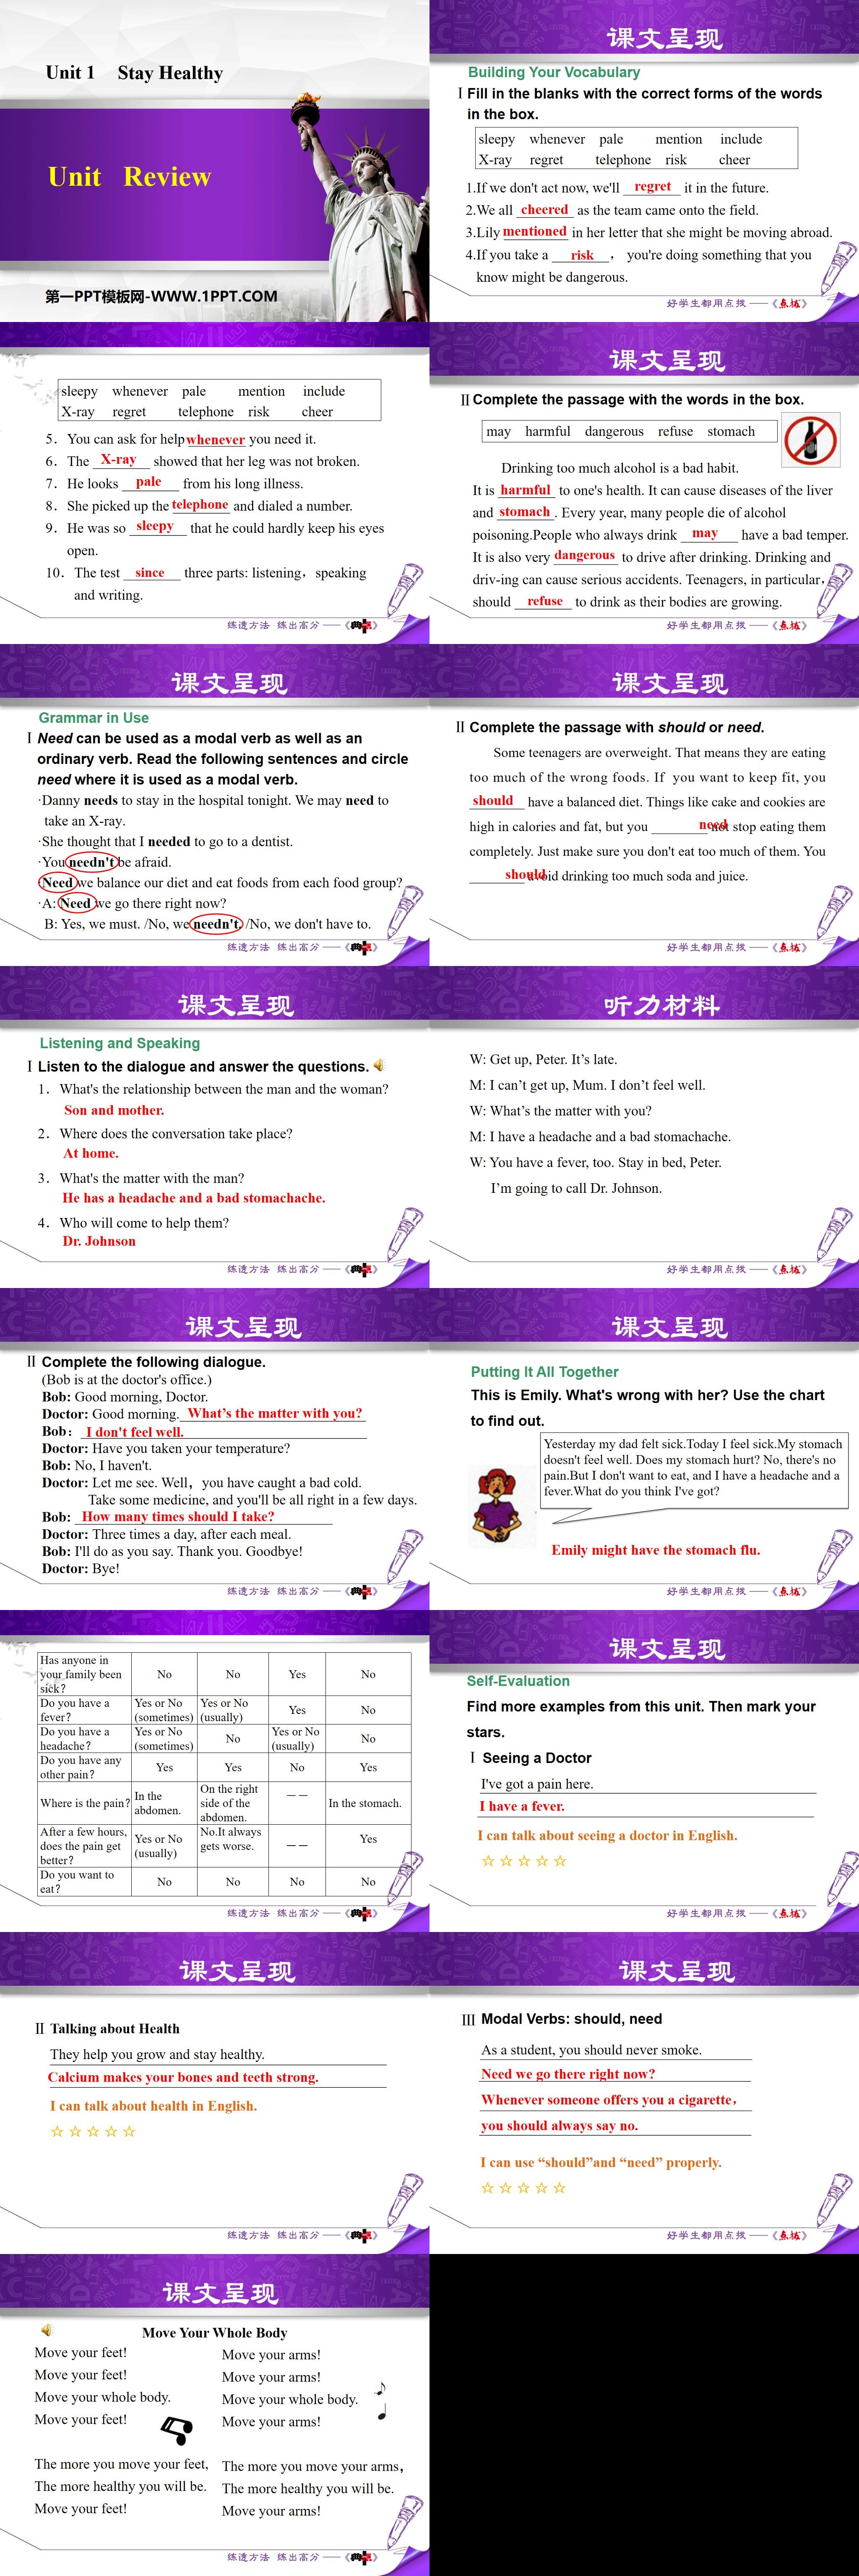 《Review》Stay healthy PPT
（2）